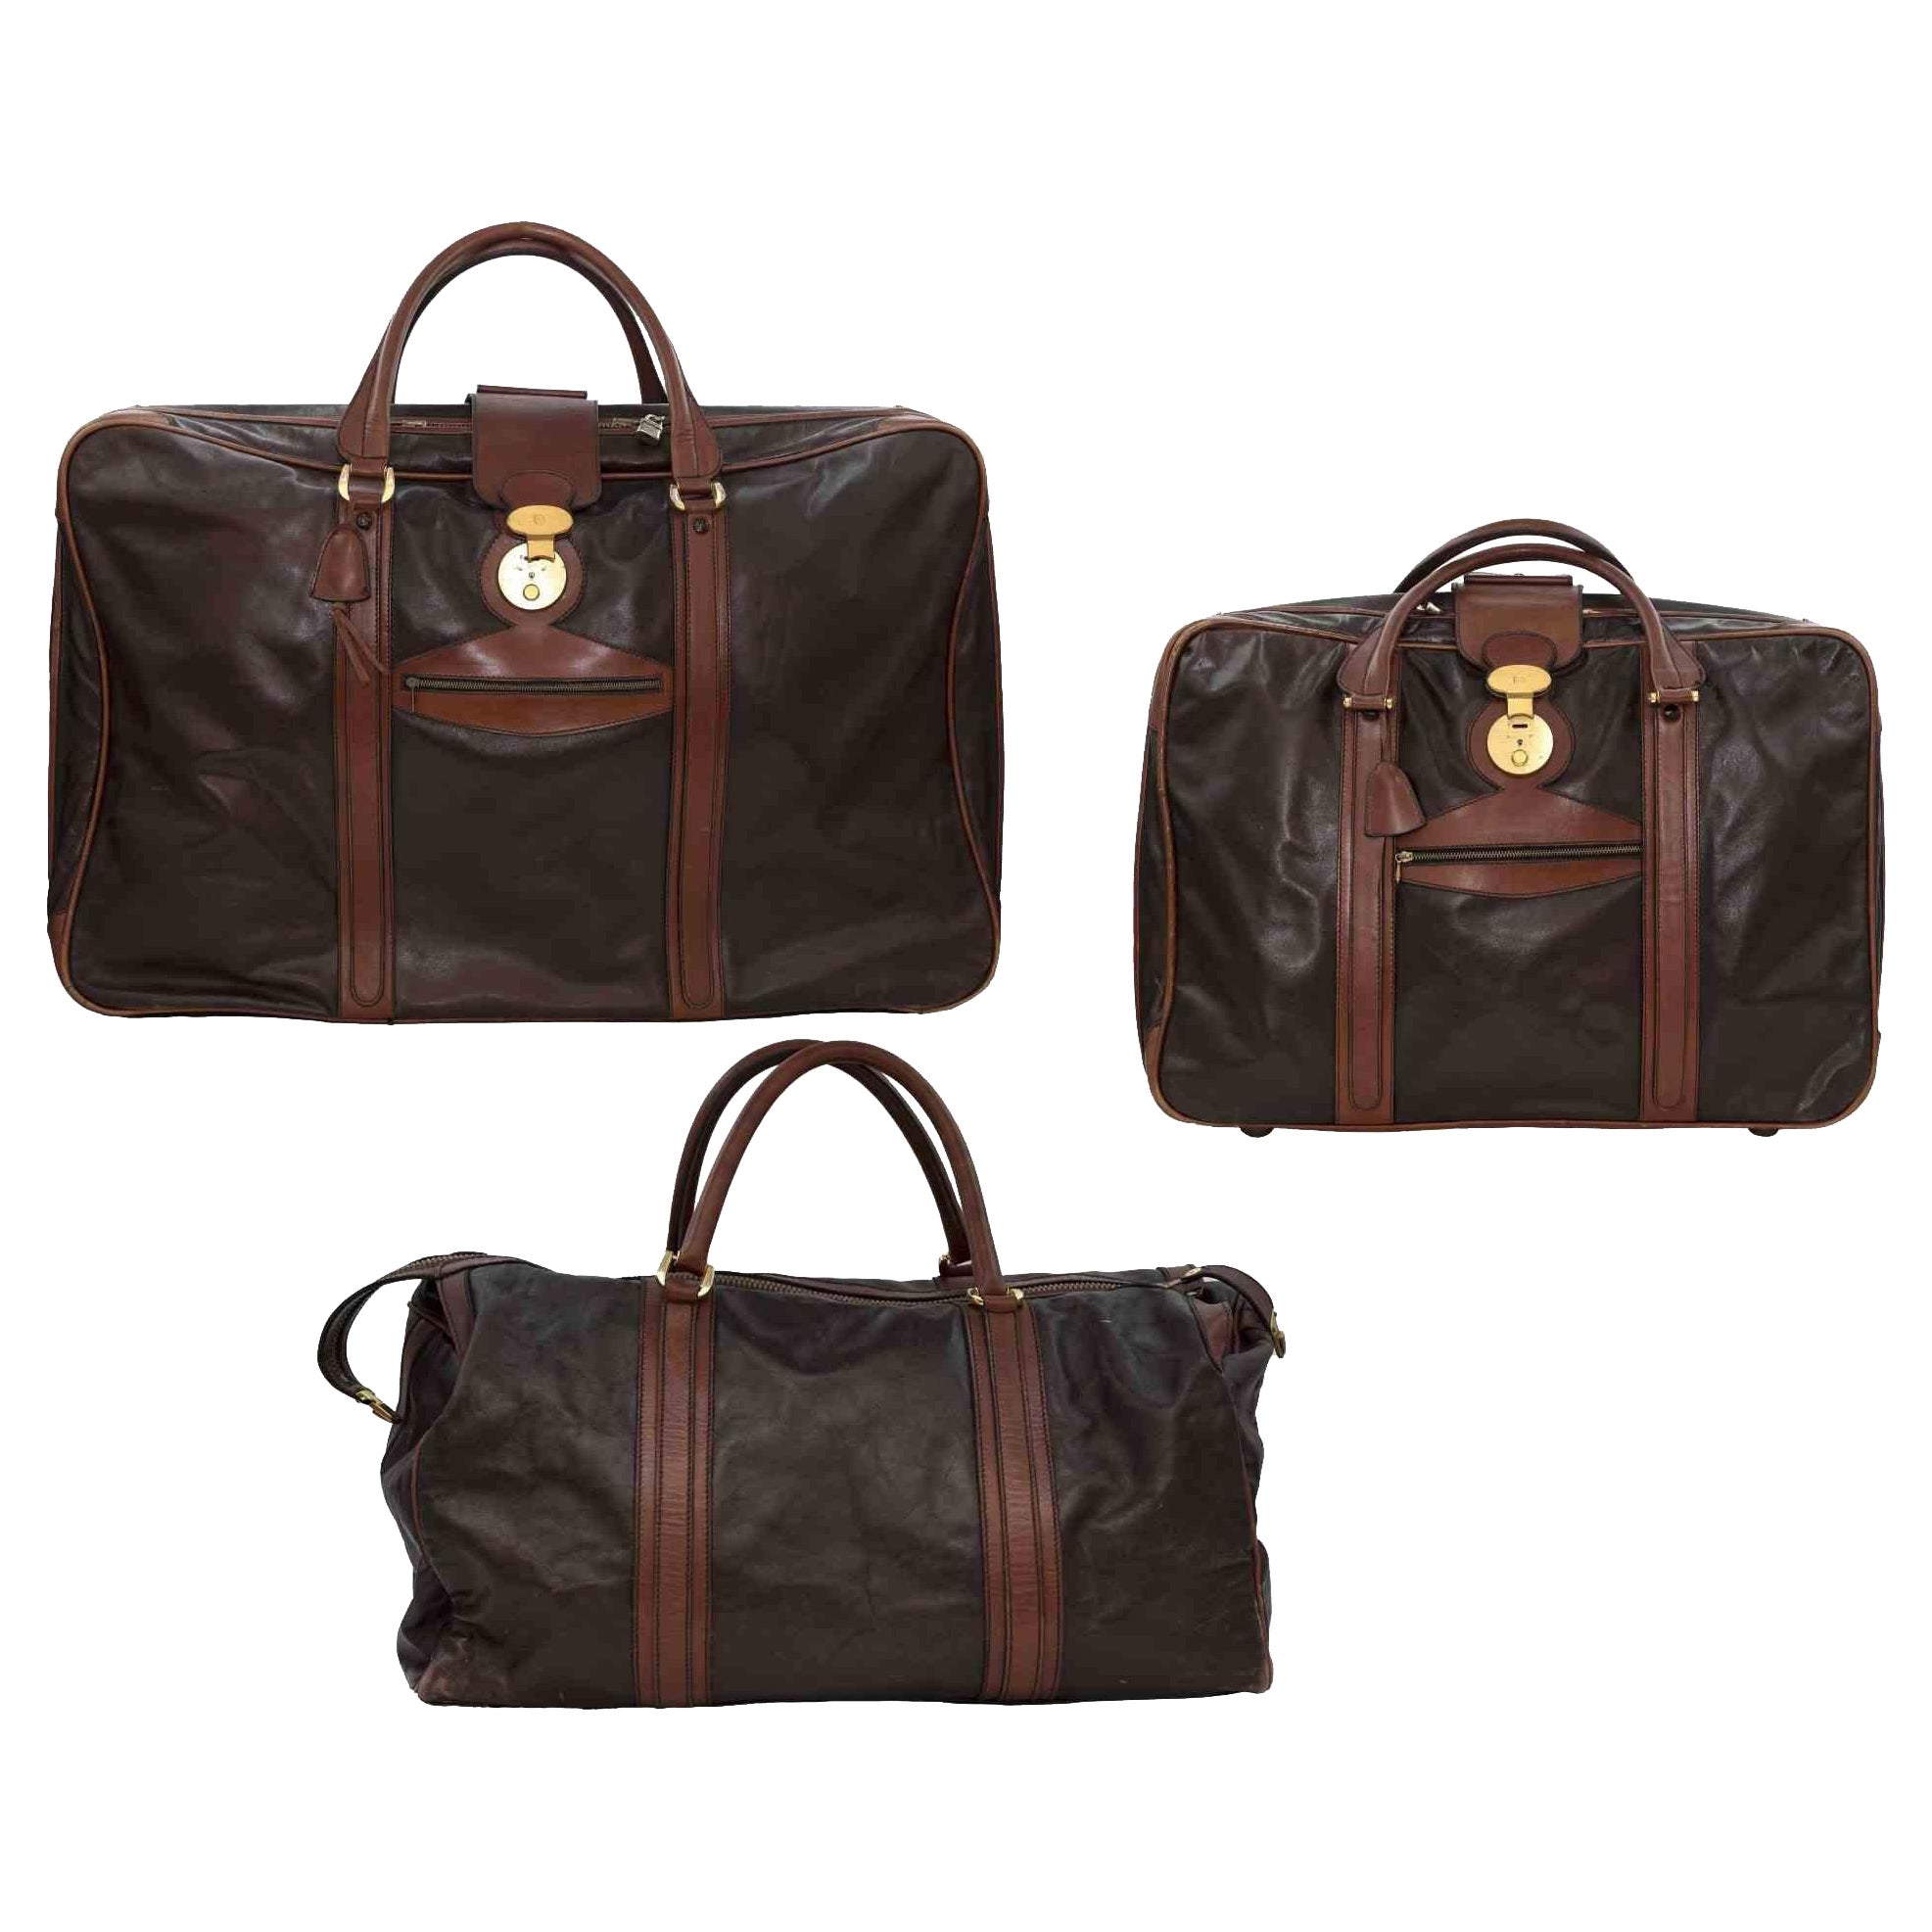 Nazareno Gabrielli Vintage Suitcases Brown Leather, 1970s For Sale